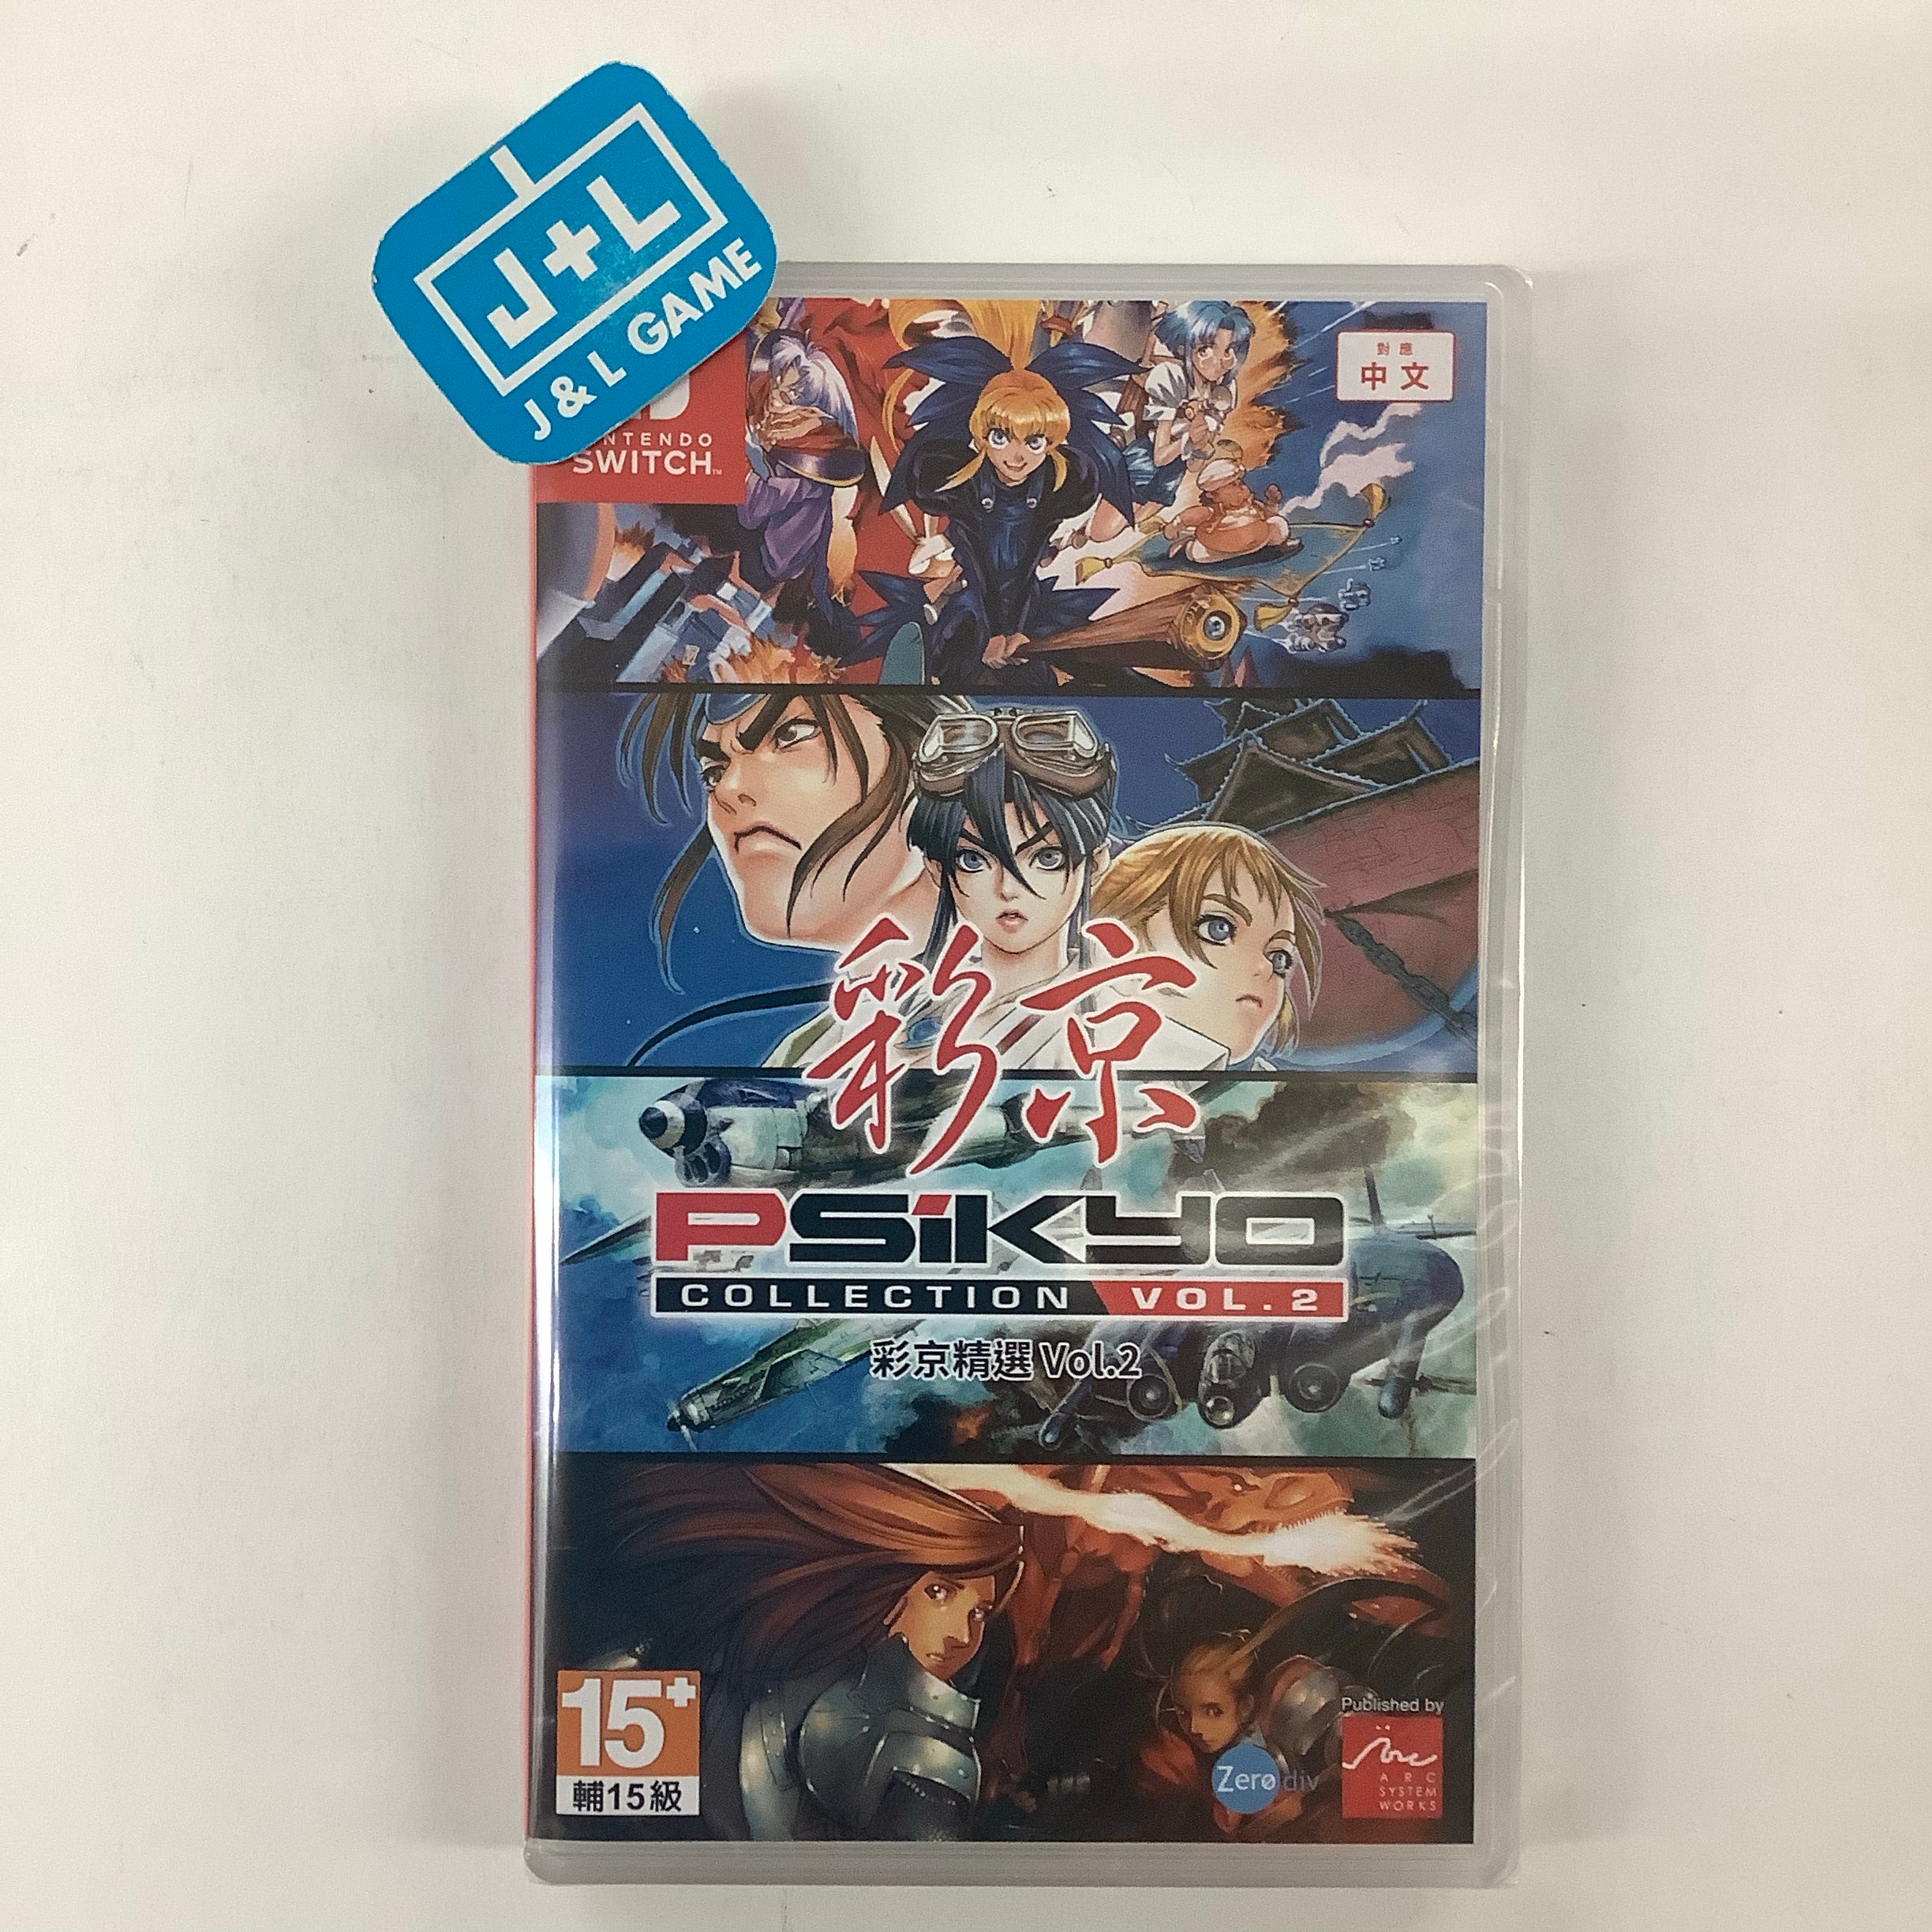 Psikyo Collection Vol. 2 - (NSW) Nintendo Switch (Asia Import) Video Games Arc System Works   